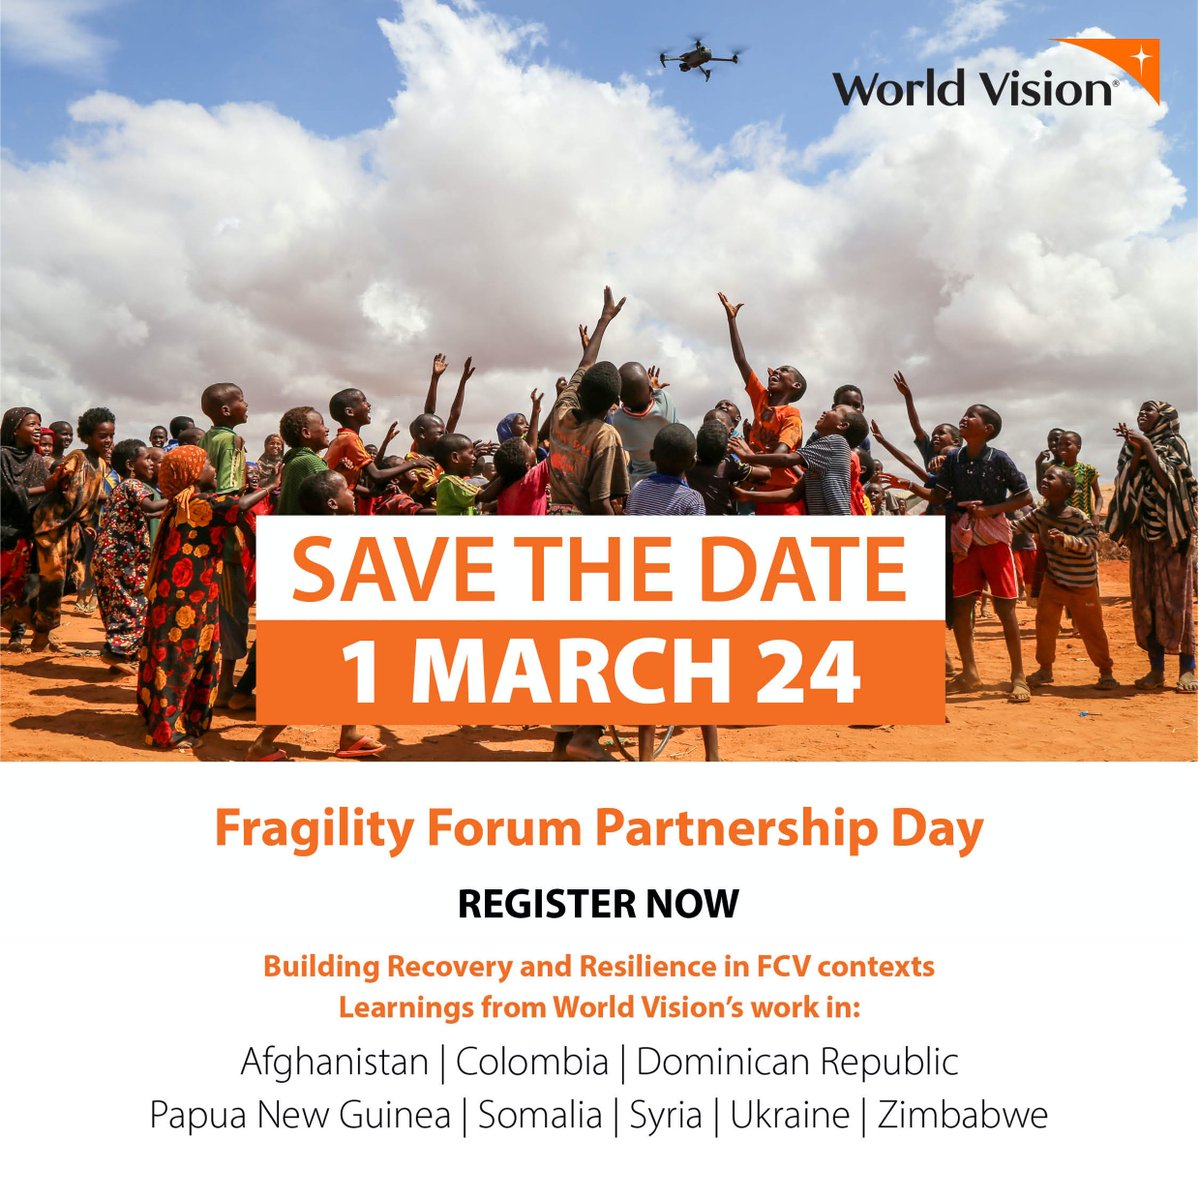 Learn about @SomRePOfficial & @WorldVision's work in fragile contexts at the @WorldBank #FragilityForum WHEN: 1 March, 9:30 AM ET REGISTER: Virtual or in-person at bit.ly/48twlpf @WVSomalia @coopi @OxfamSomali @DRCSomalia @adra_somali @caresom @Shaqodoonorg @ACFsomaliaCD